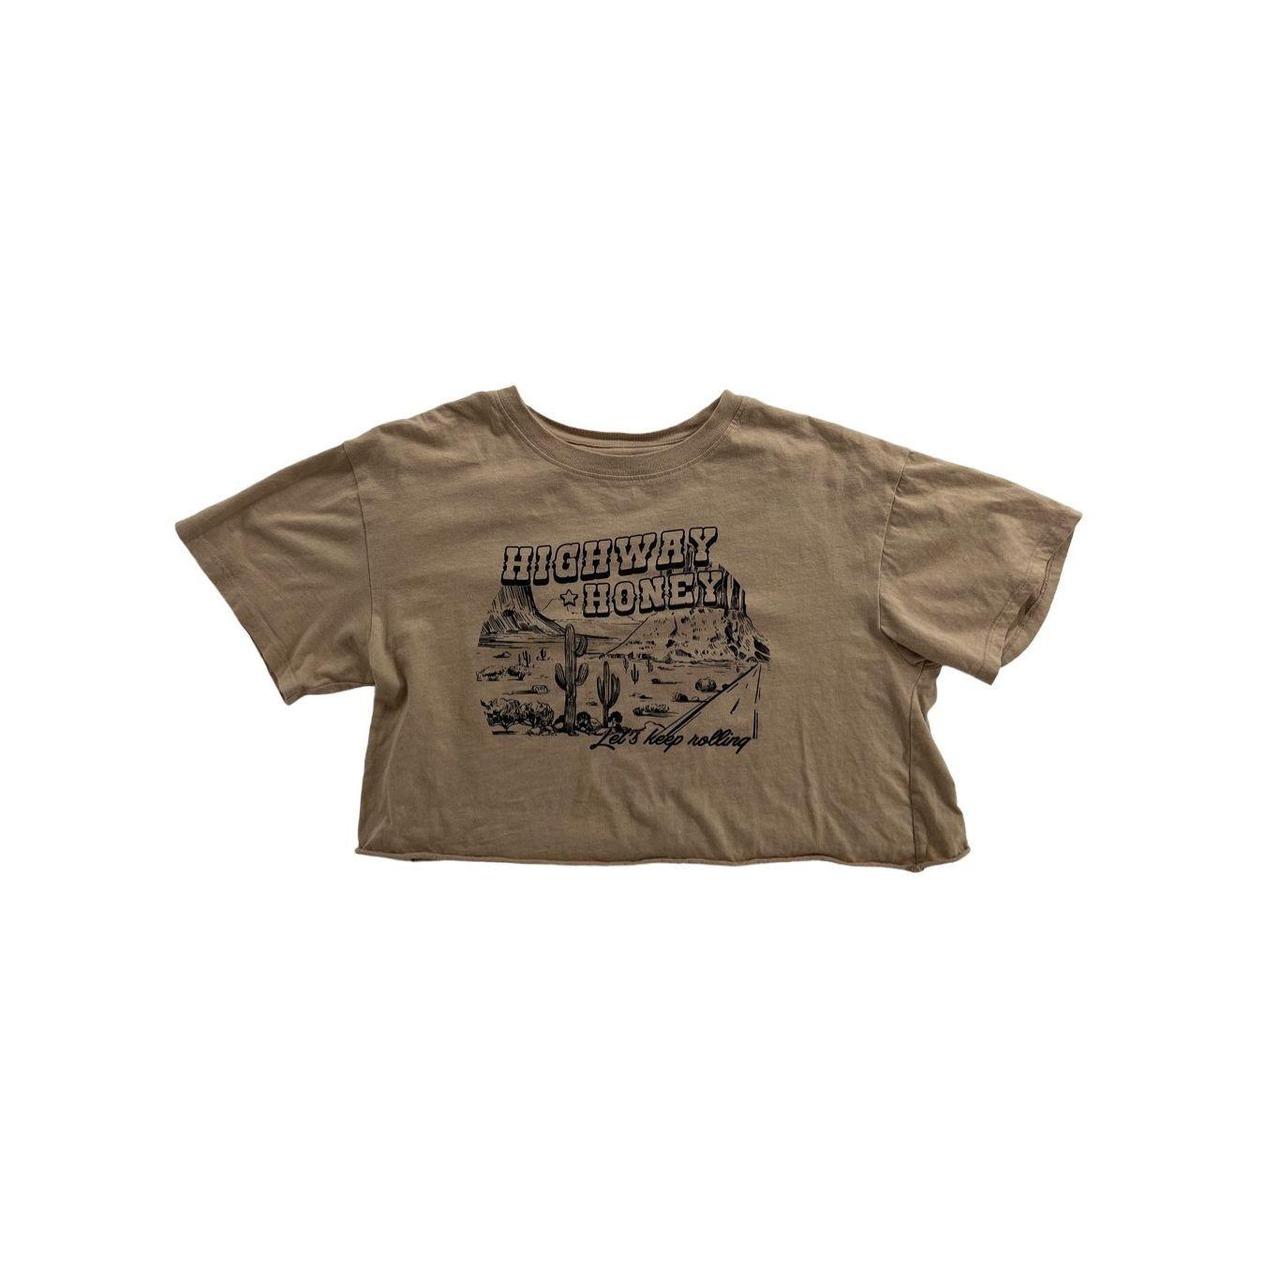 Cold Crush Women's Brown and Tan T-shirt